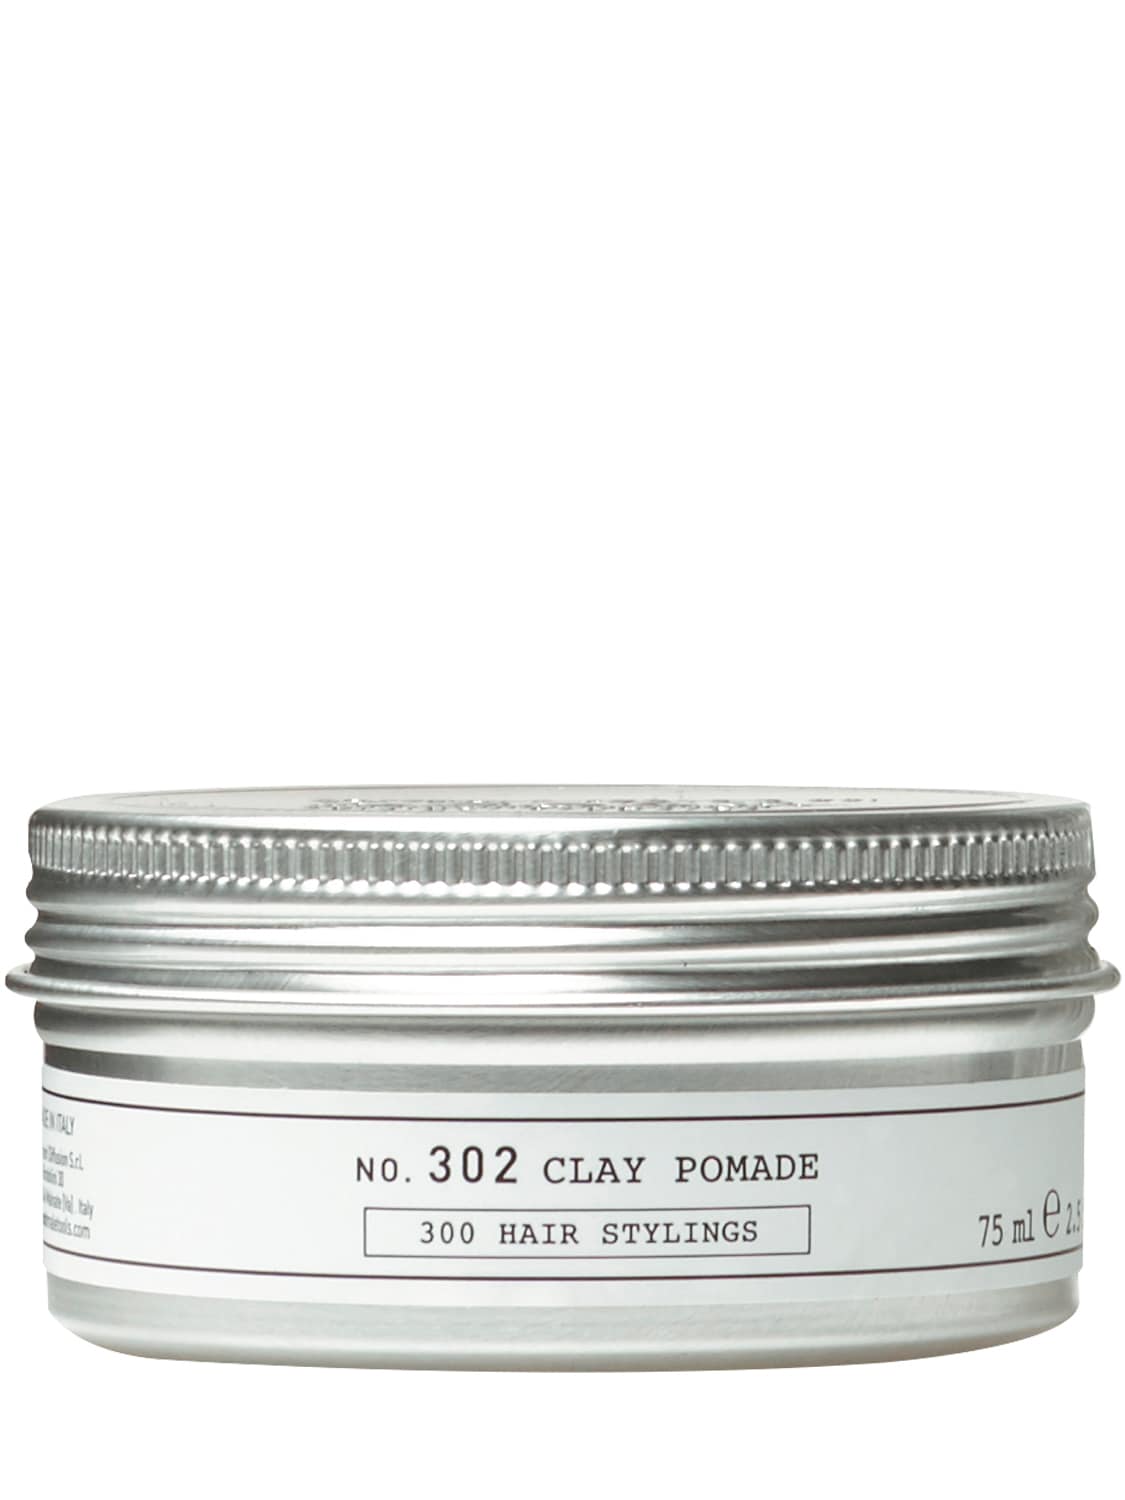 Image of N.302 Clay Pomade